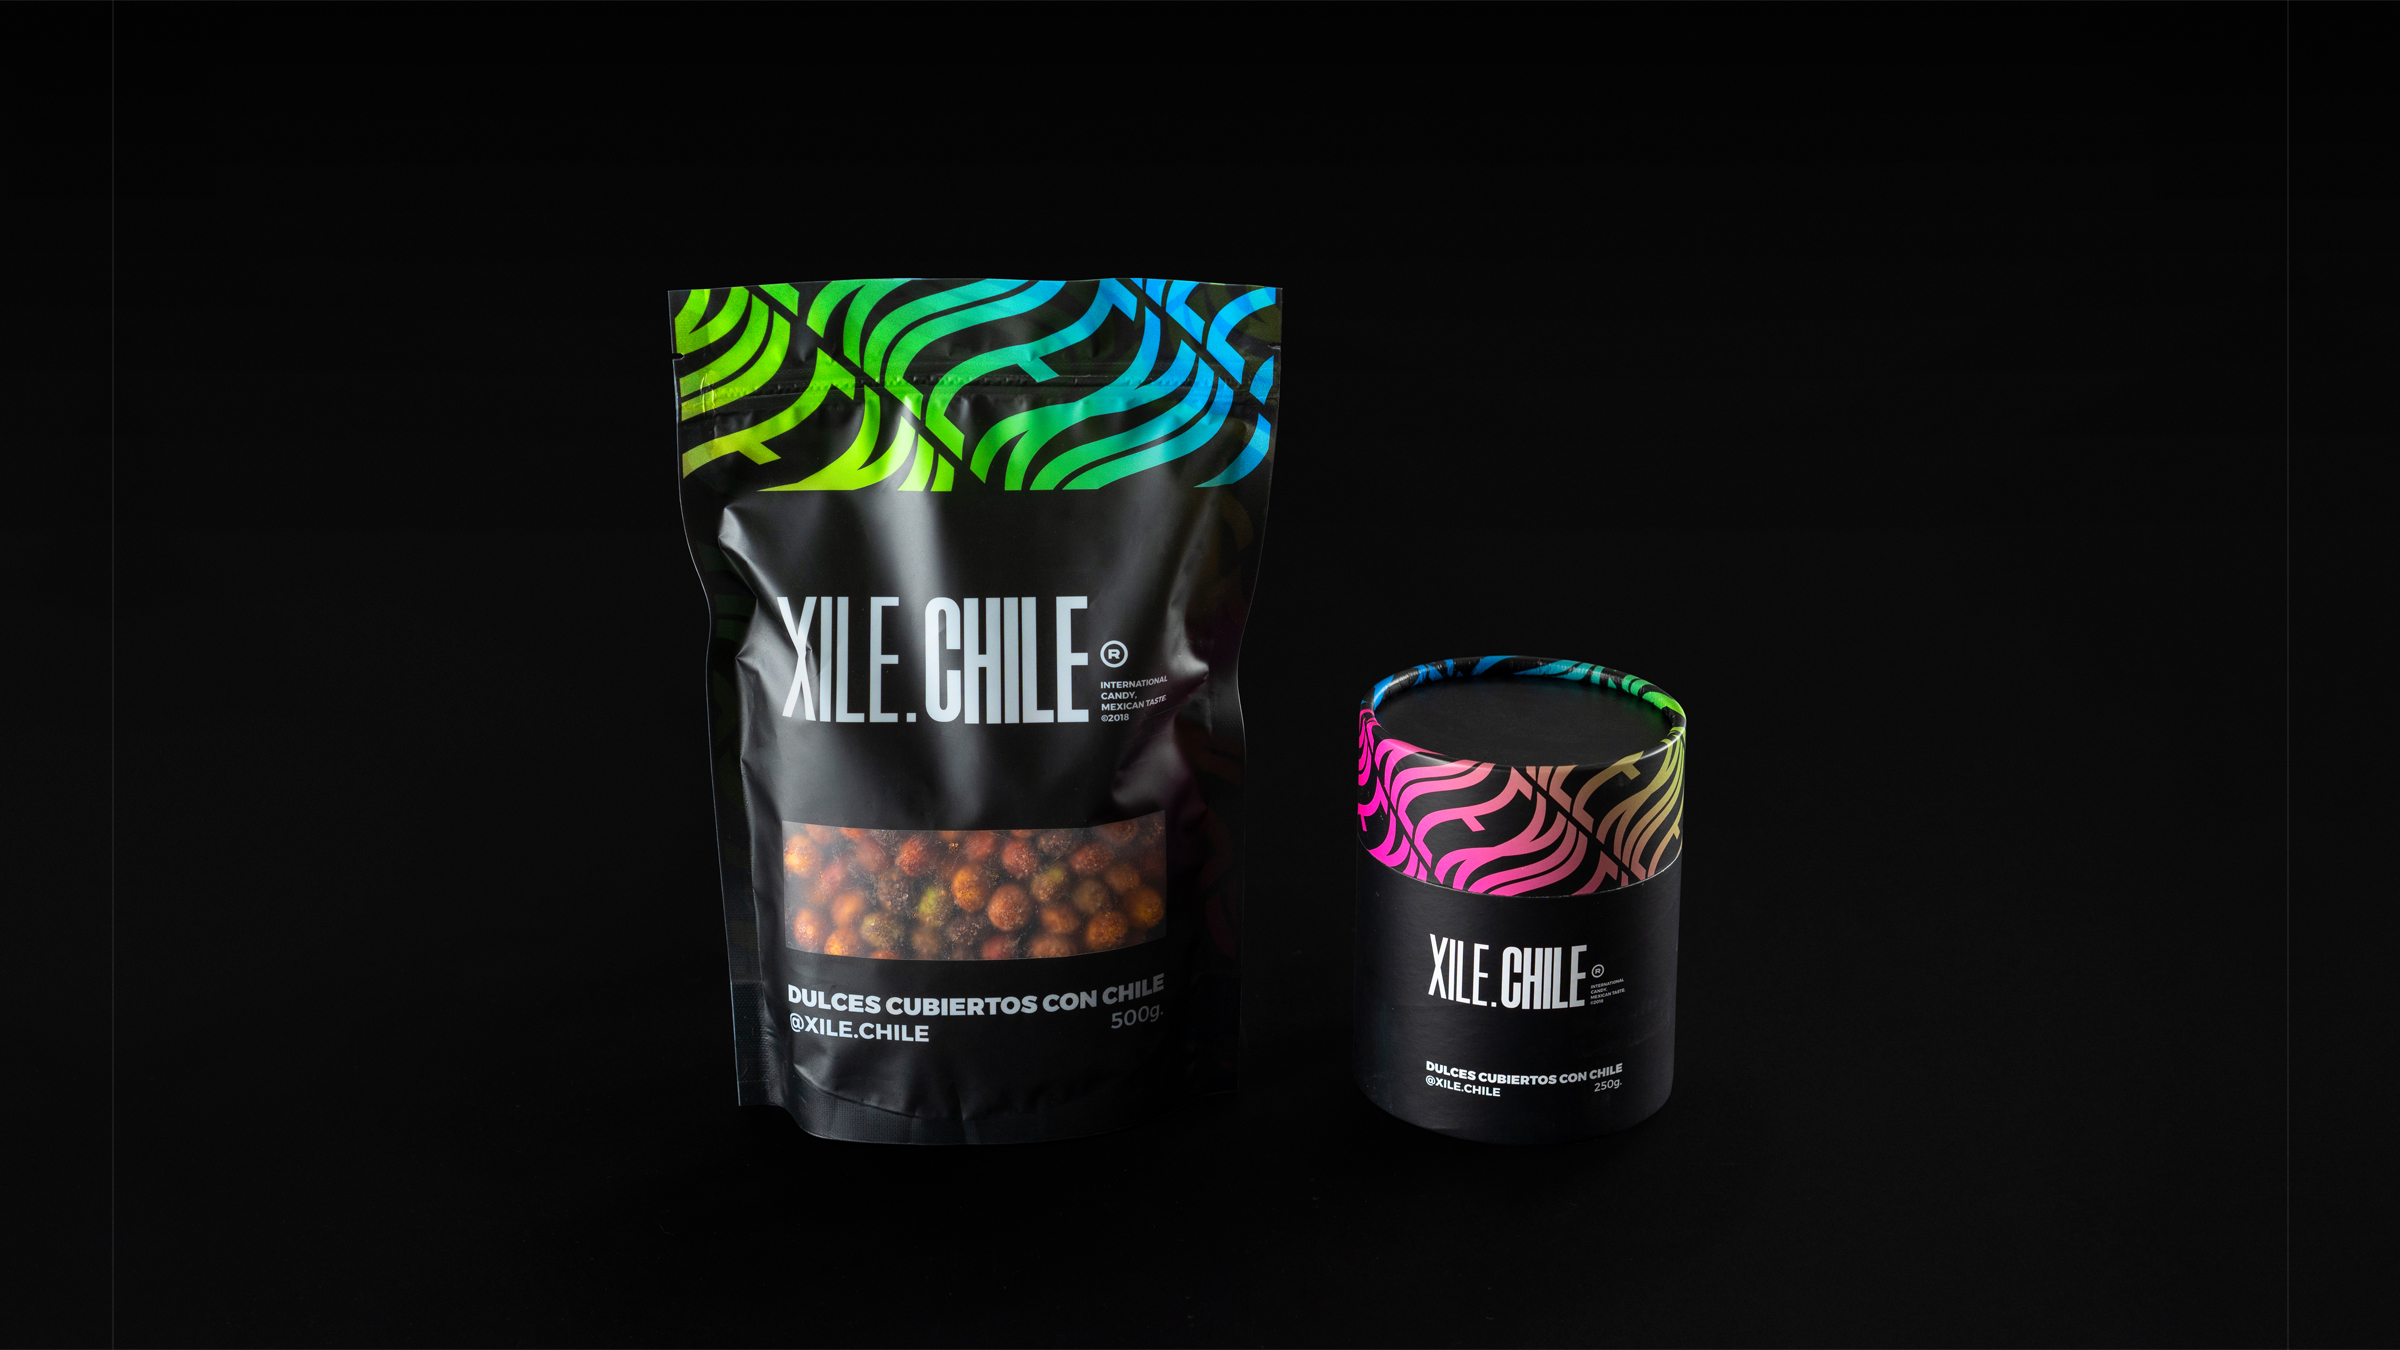 Shift Agency Creates Brand and Packaging Design for International Candy Mexican Brand Xile Chile